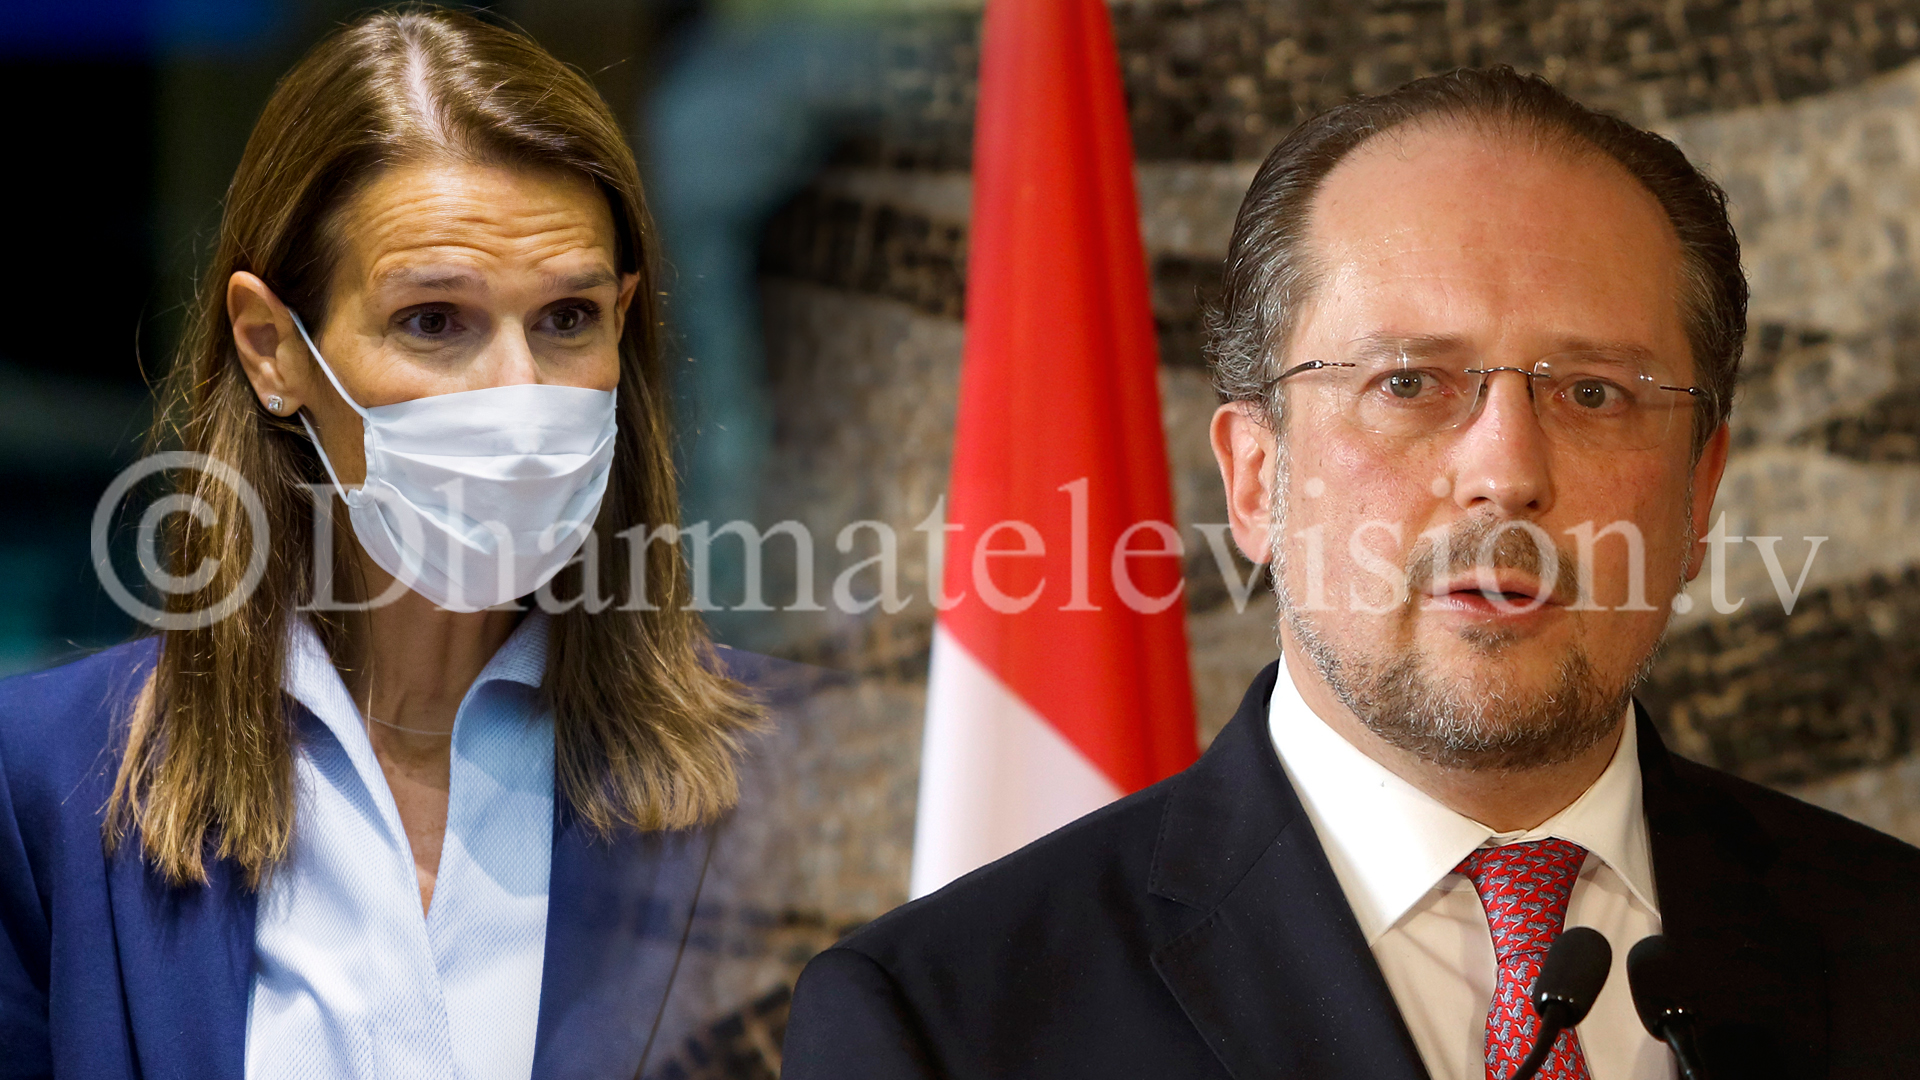 Belgium and Austria Foreign Ministers test positive for COVID-19 after EU meeting